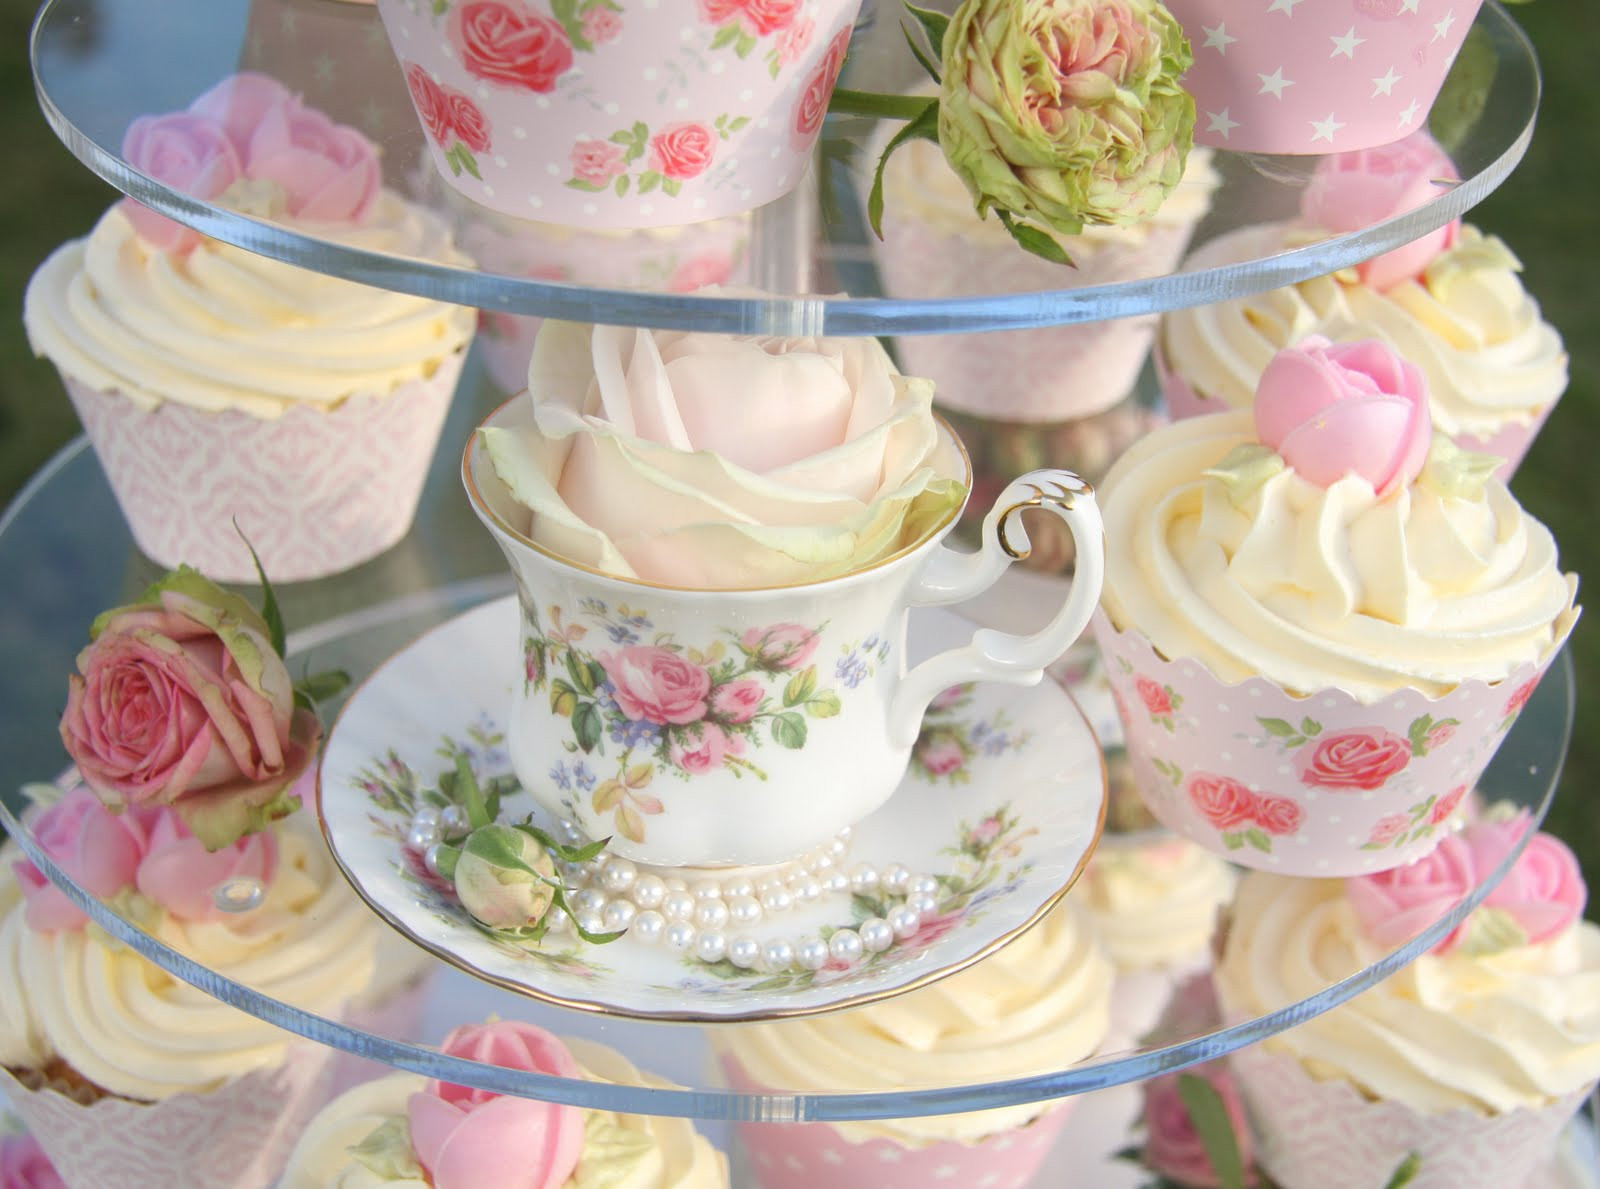 Tea Party Cake Ideas
 Life is What You Bake it Vintage Cake Cupcakes & Tea Cups